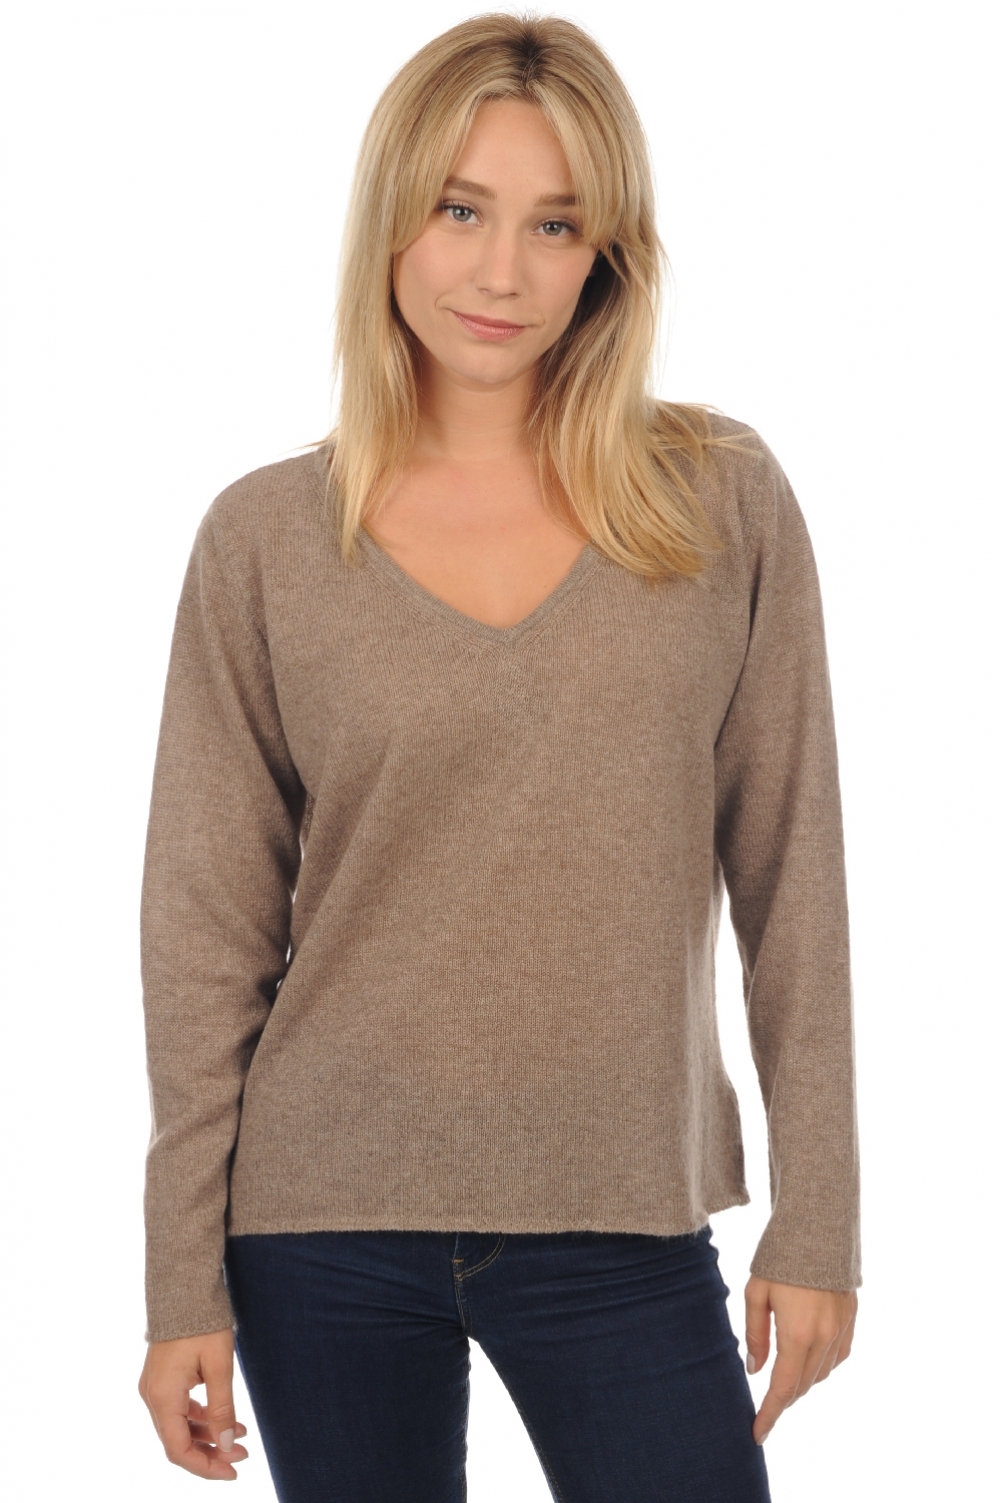 Cashmere ladies timeless classics flavie natural brown xl